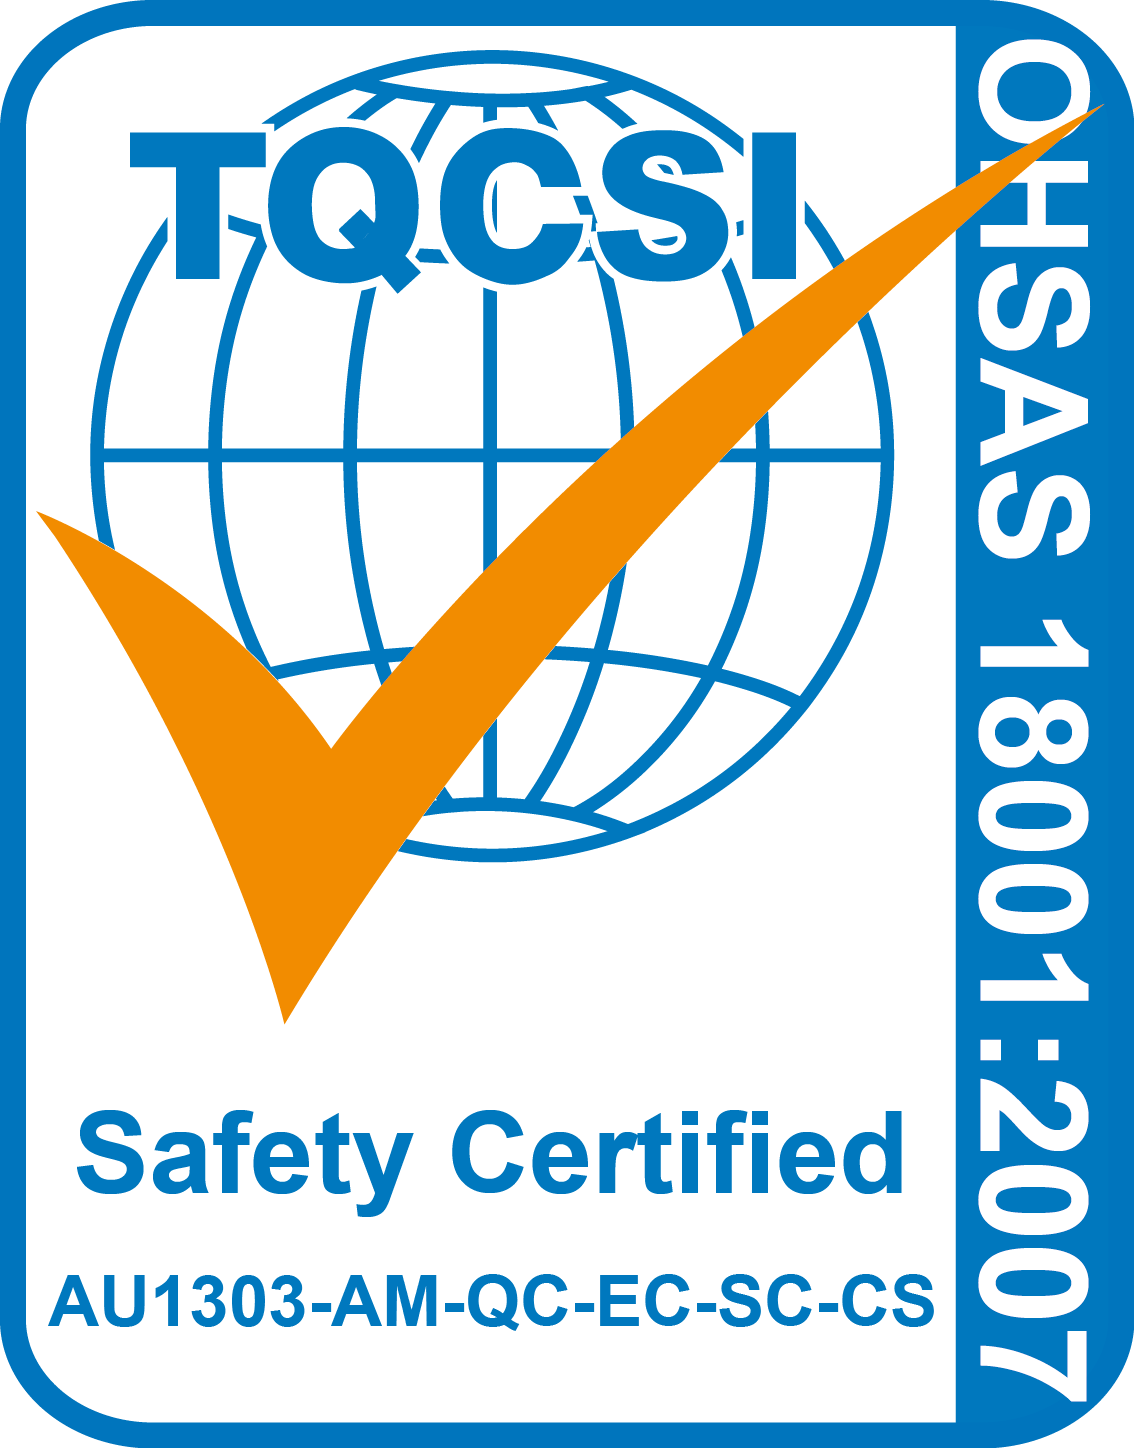 AS 4801 Certification Mark.png